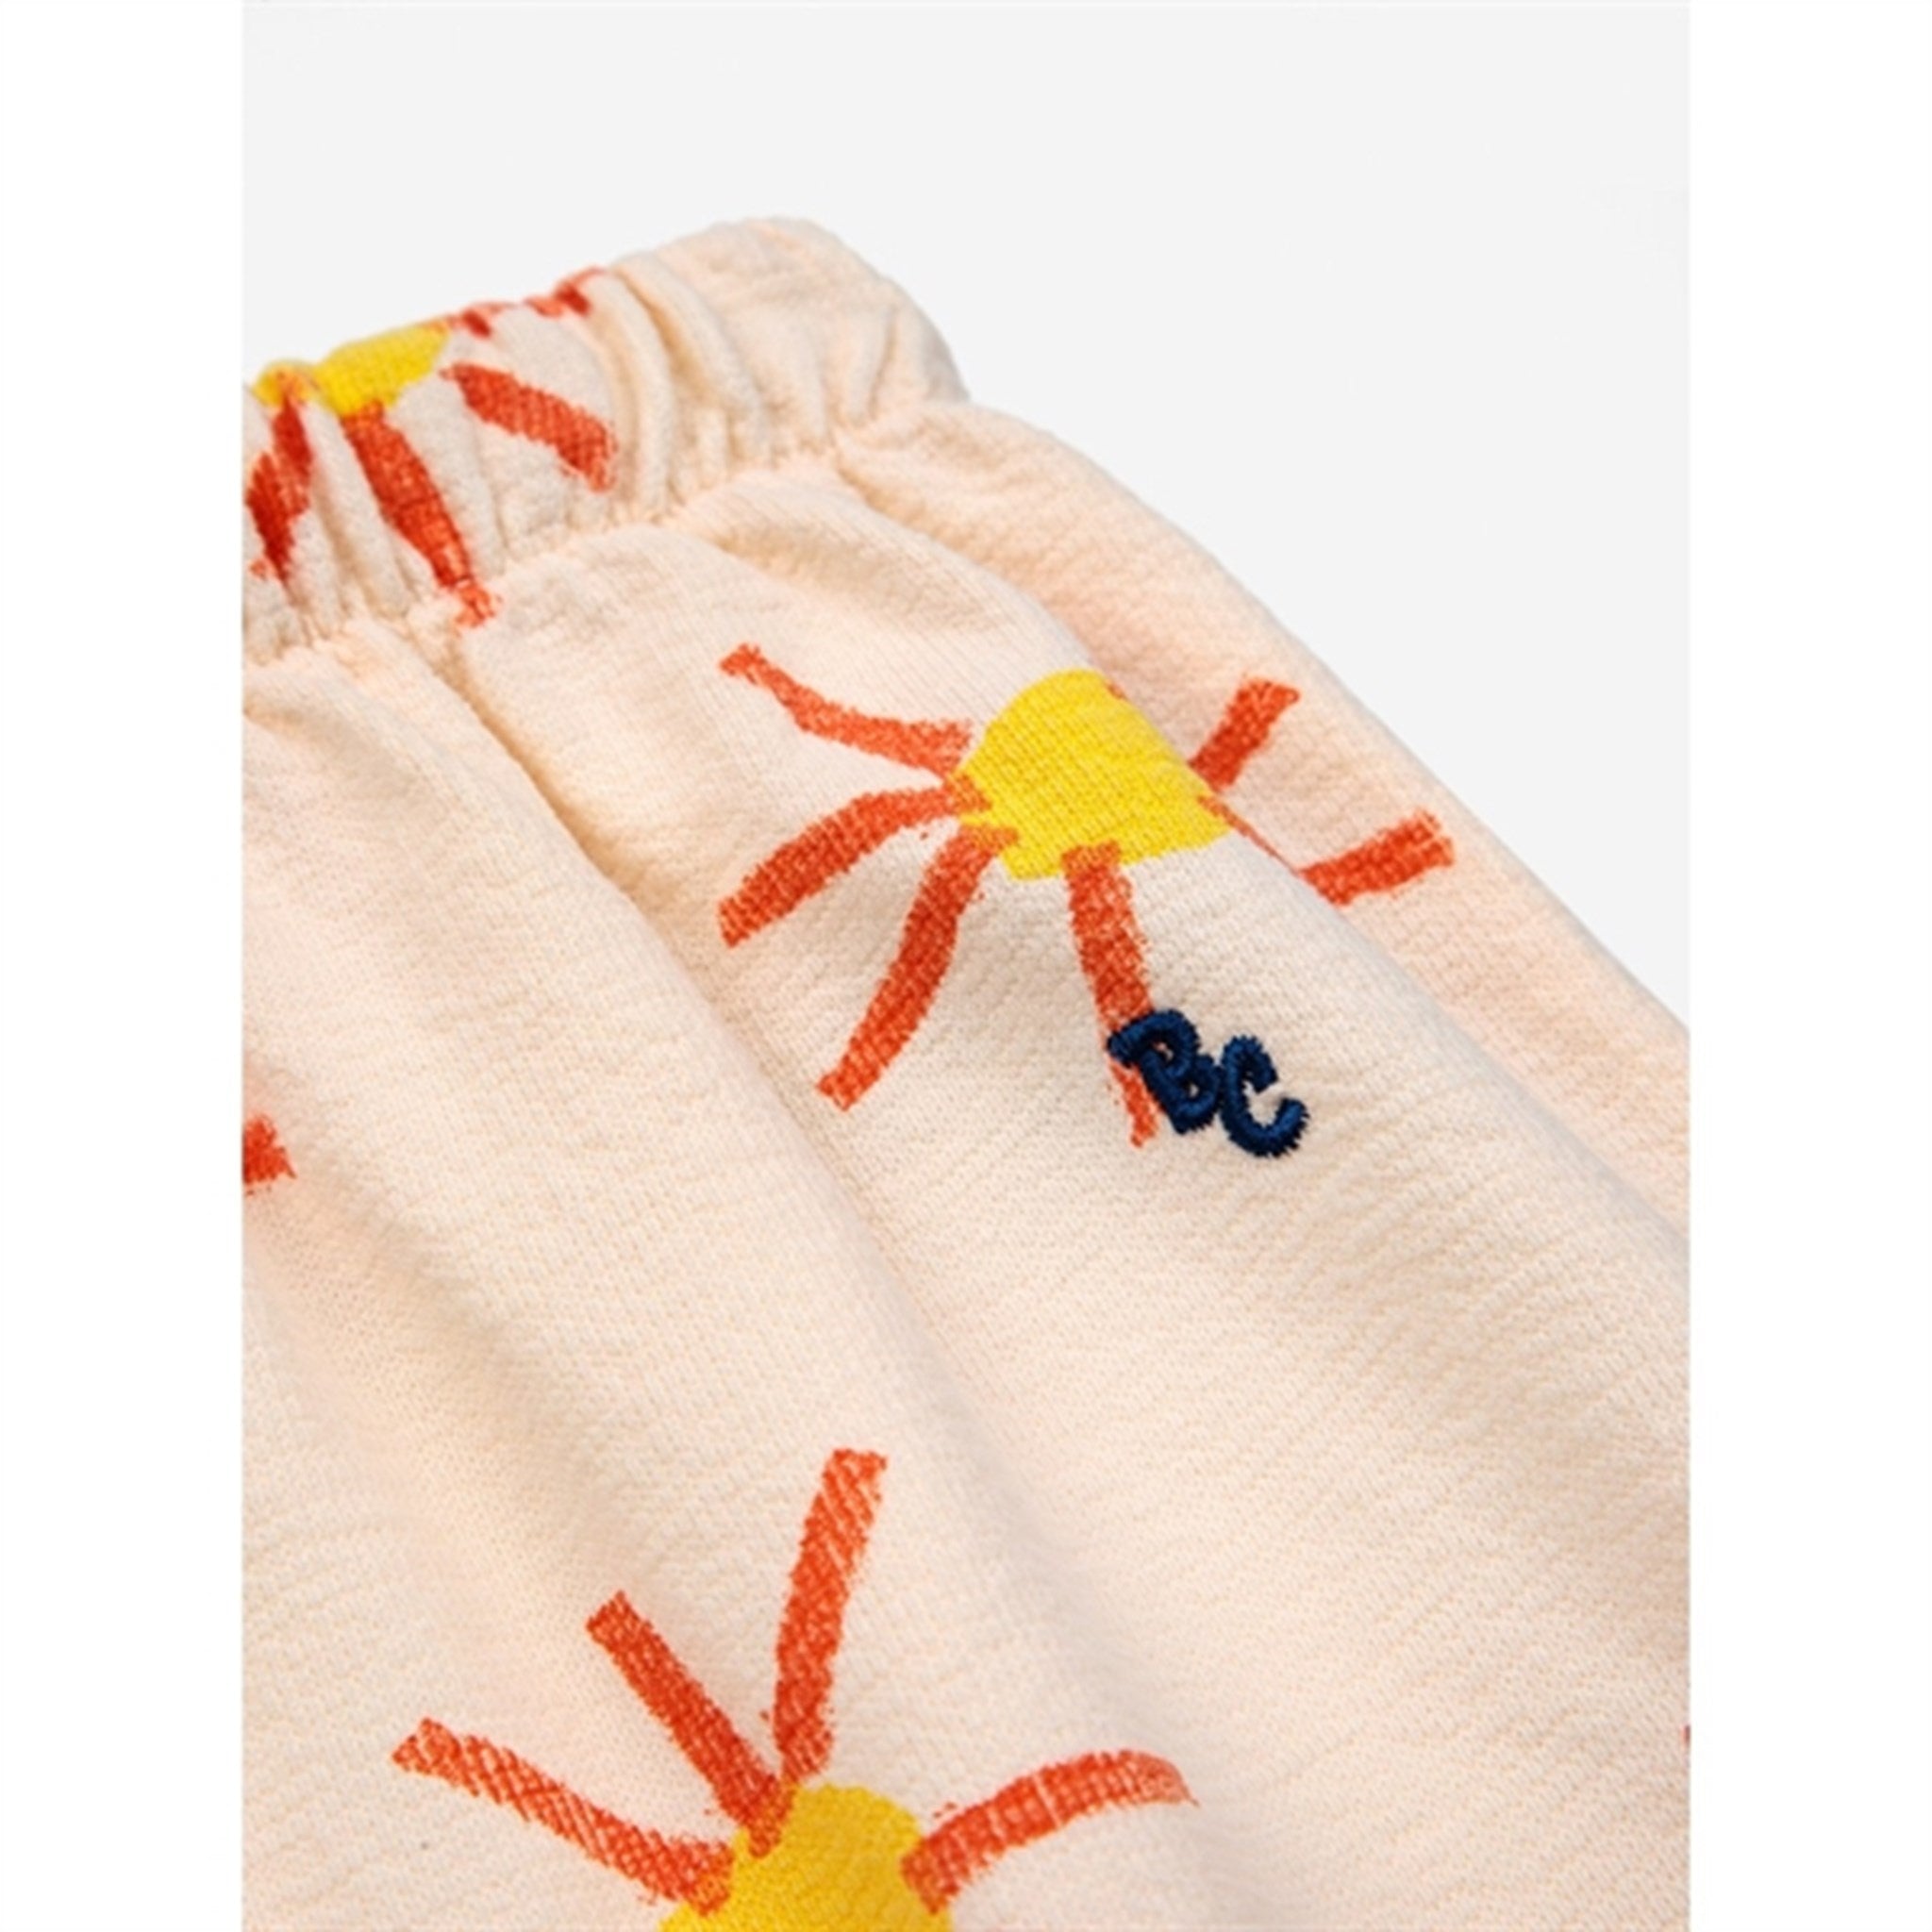 Bobo Choses Baby Sun All Over Harem Sweatpants Offwhite 3